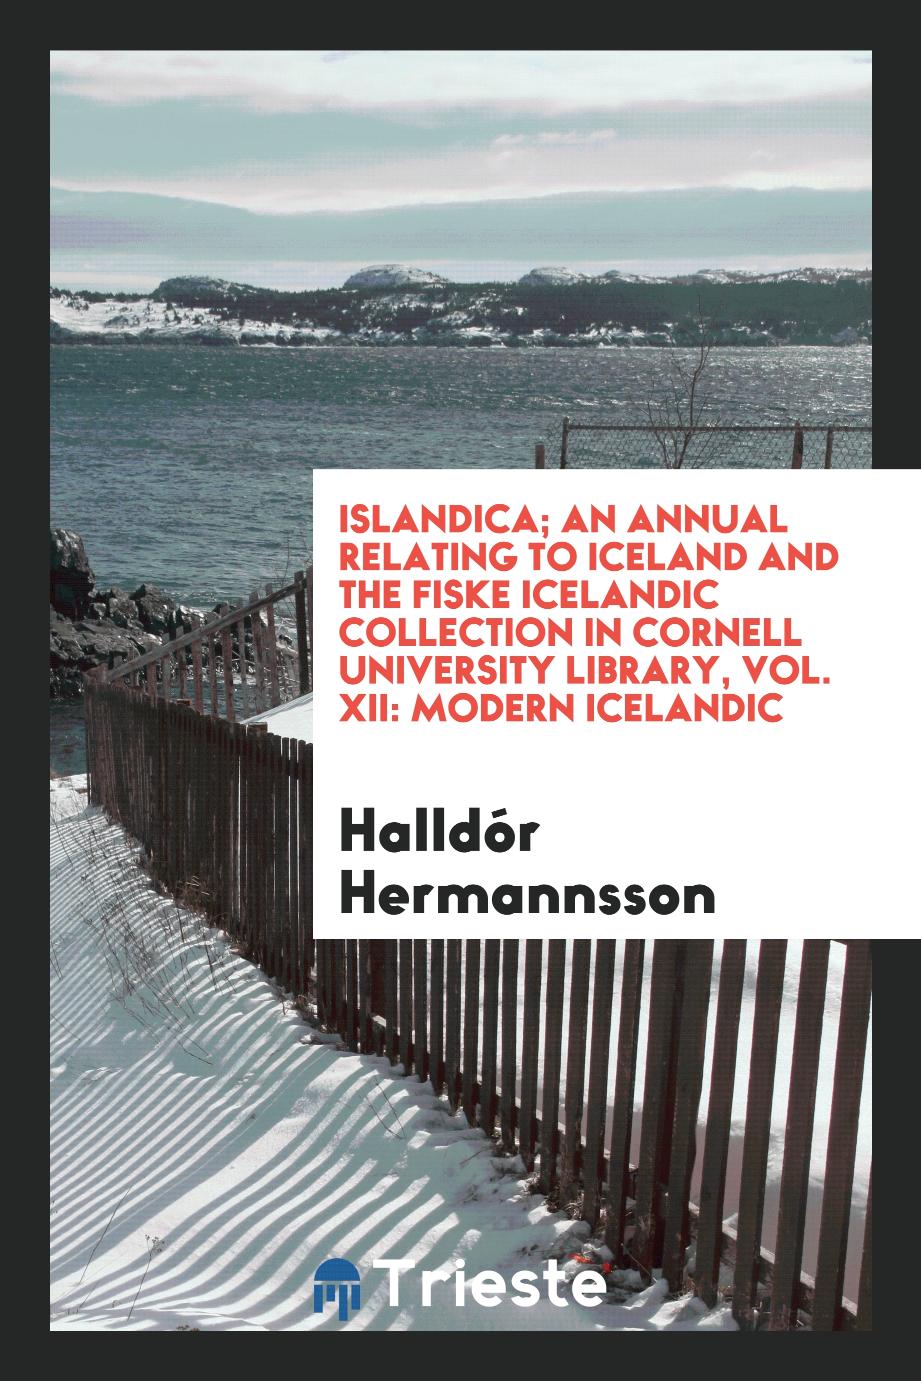 Islandica; An annual relating to iceland and the fiske icelandic collection in cornell university library, Vol. XII: modern icelandic